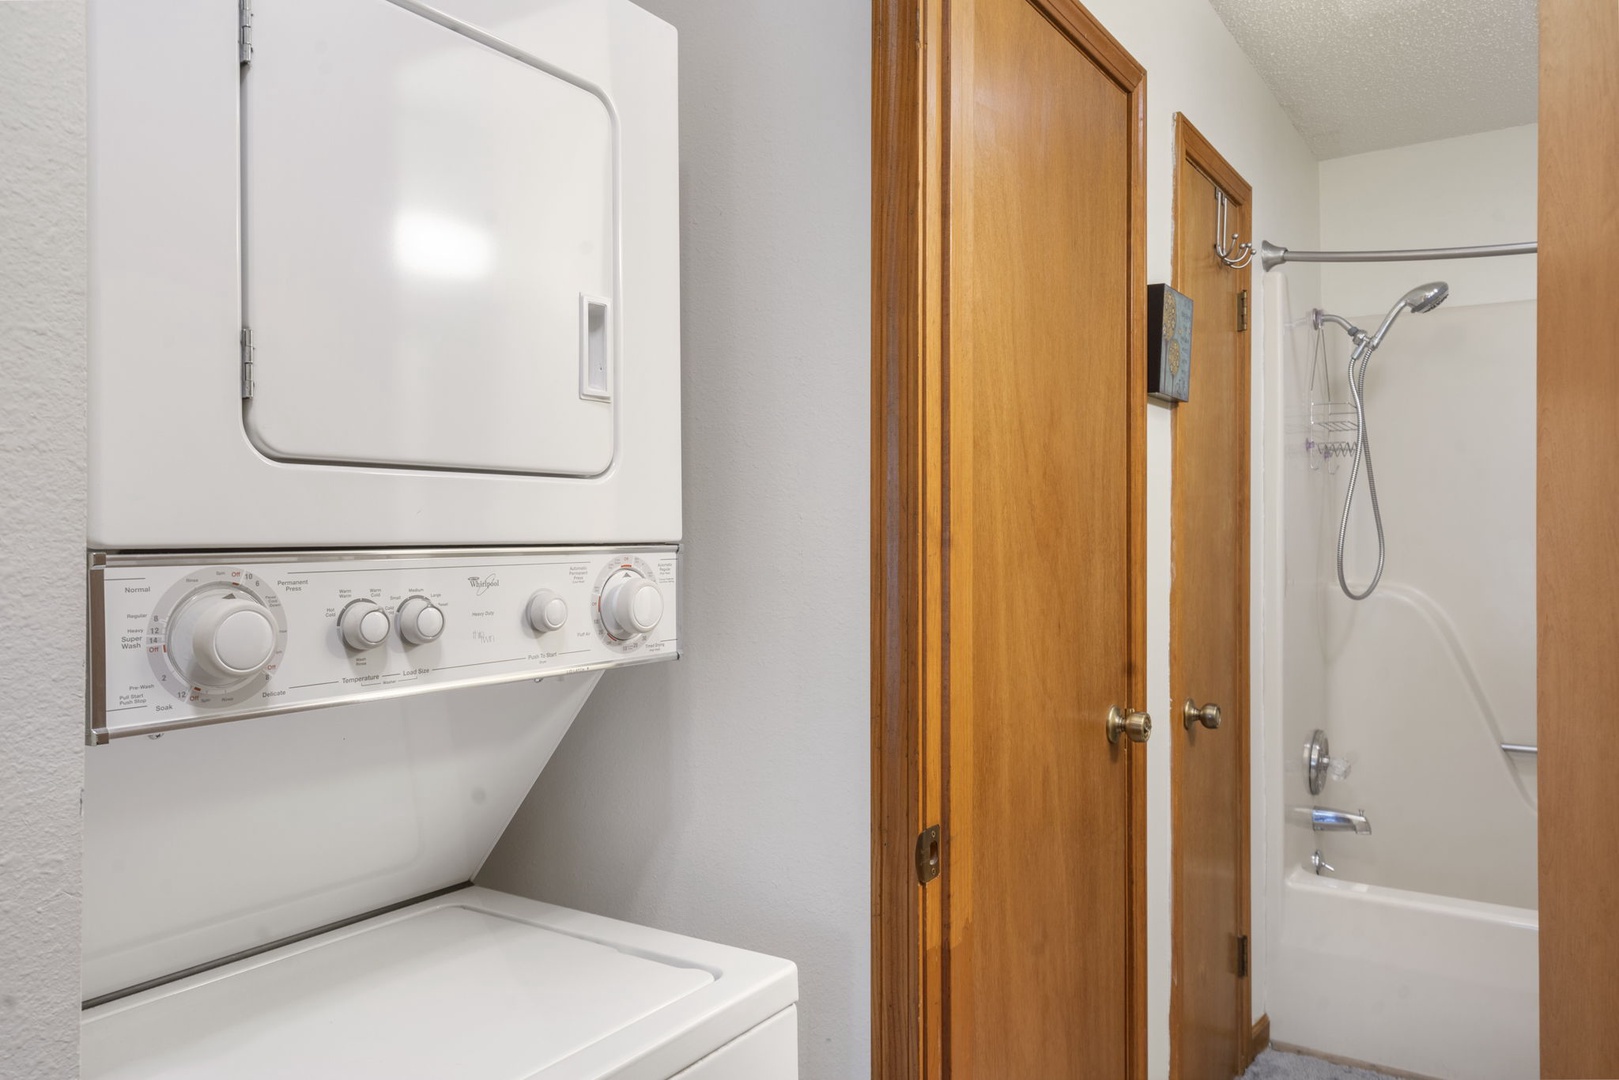 Private laundry is available for your stay, just off the master bath